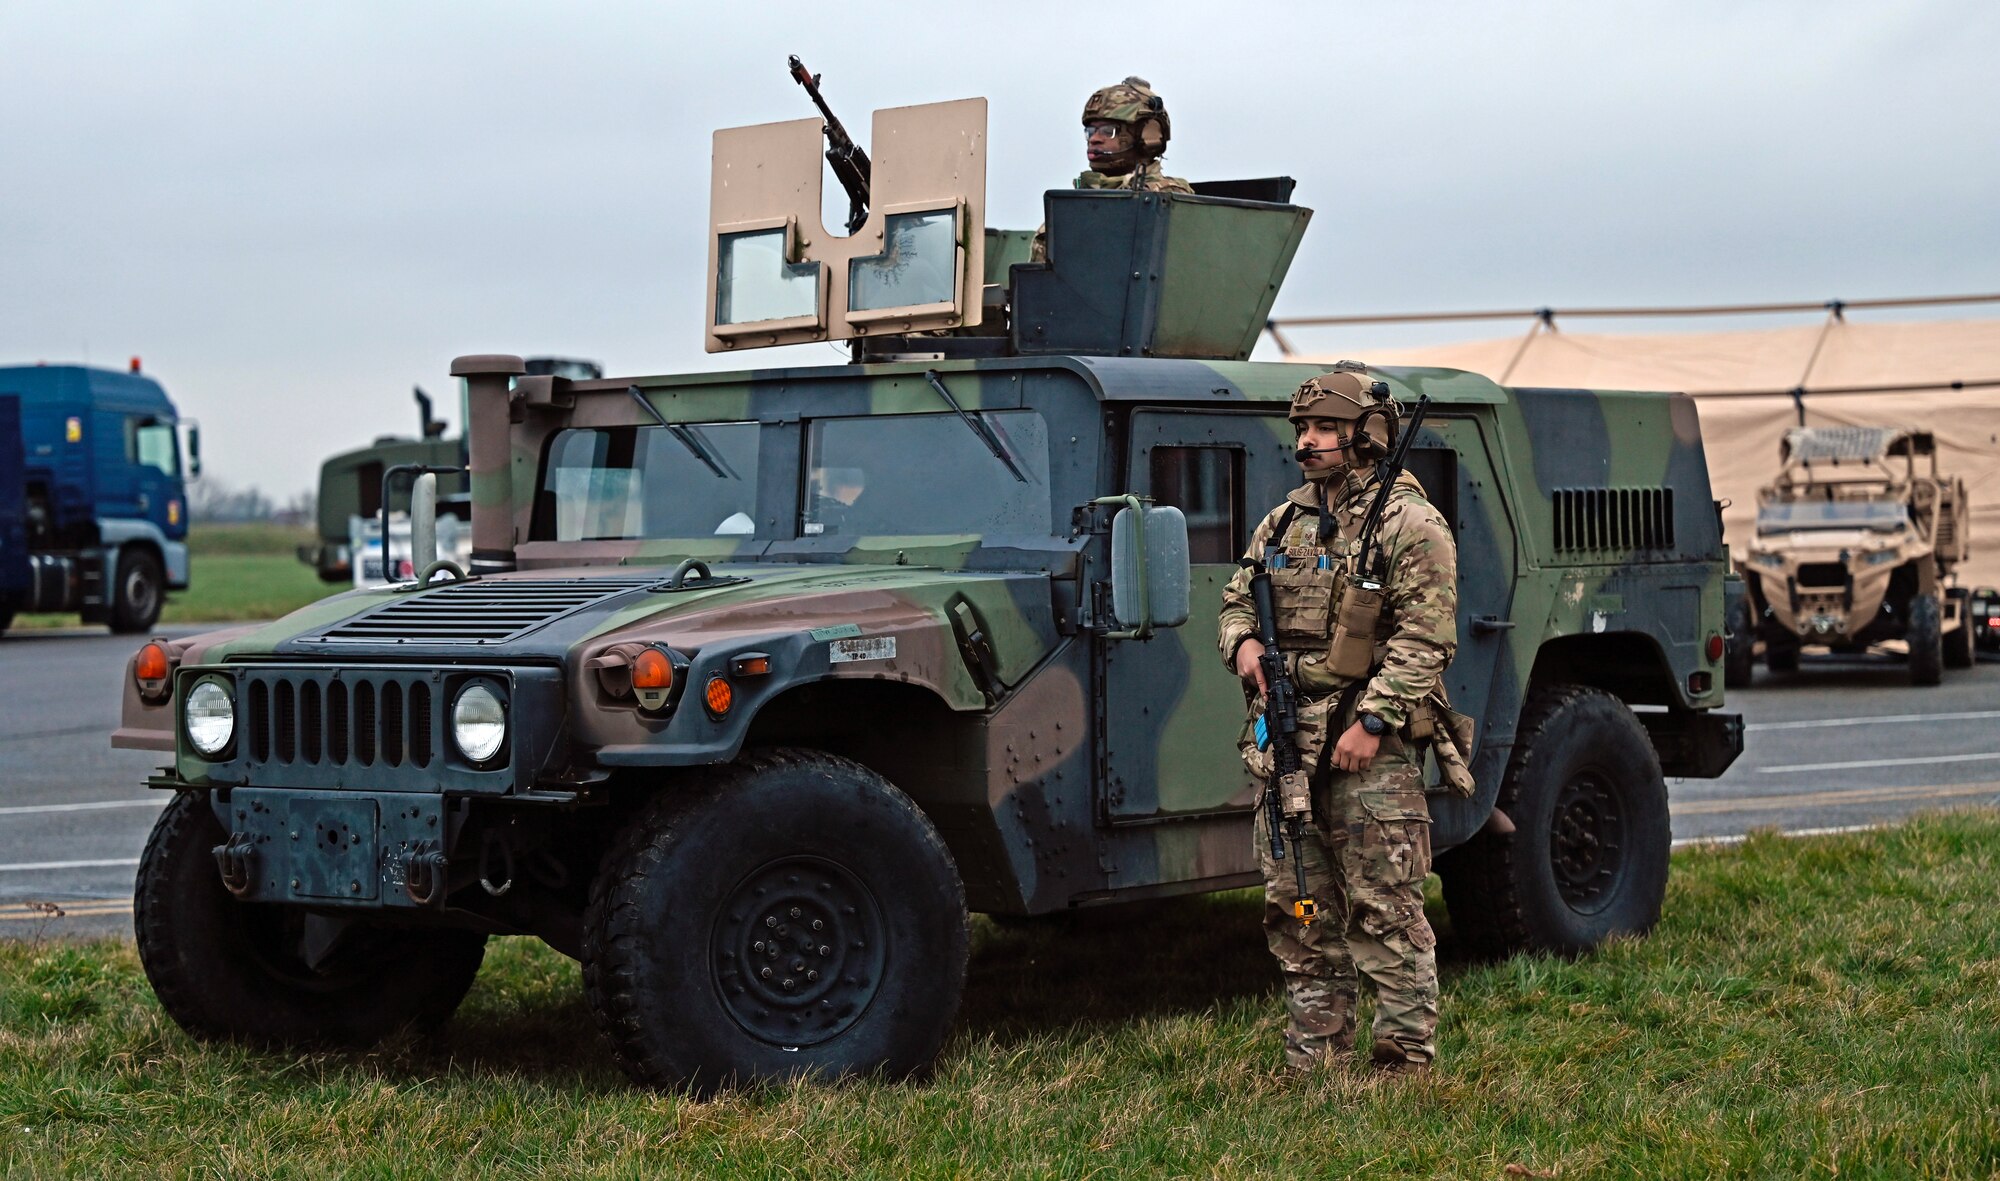 U.S. Air Force Staff Sgts. Mason E-Quantay, top, and Jesus Solis-Zavala, right, both 435th Security Forces Squadron contingency response team members, provide security during Exercise Agile Bison 23-1 at Chièvres Air Base, Belgium, March 7, 2023. By executing Exercise Agile Bison, the 435th Contingency Response Group boosts their confidence, flexibility and capability to assist and work with allied and partner nations.